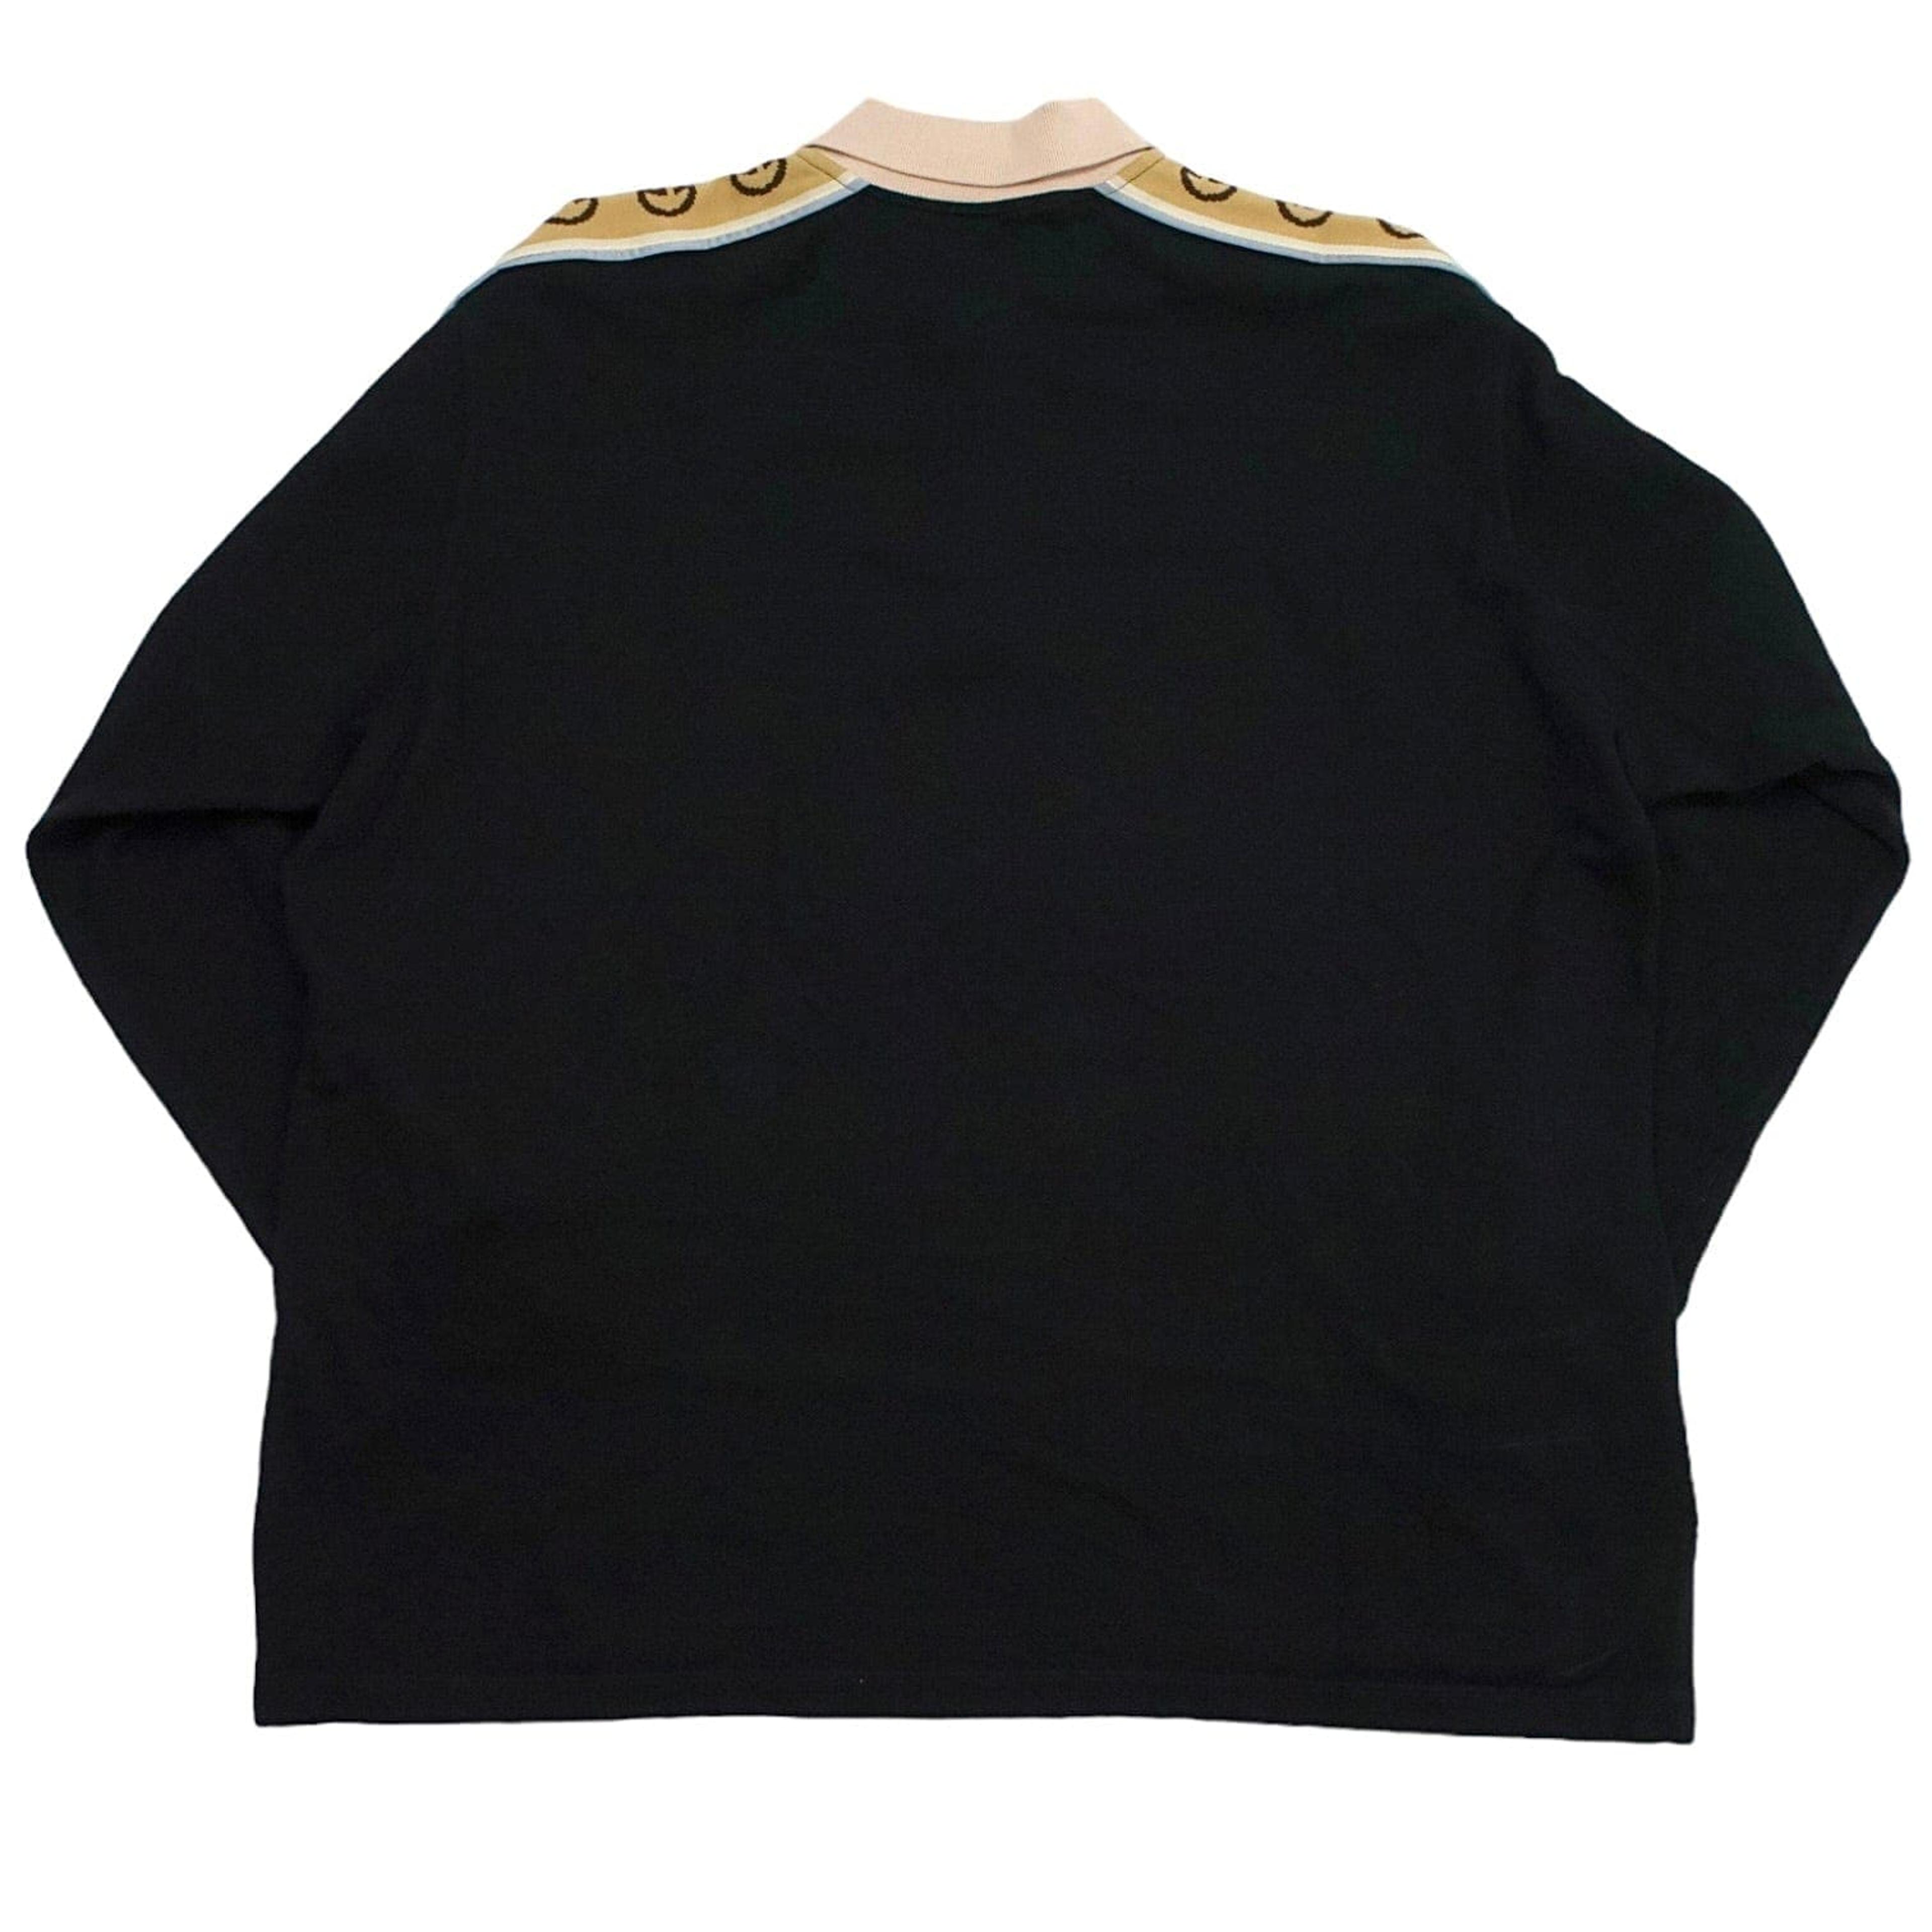 Alternate View 1 of Gucci Taped Logo Long Sleeve Polo Tee Shirt Black Pre-Owned